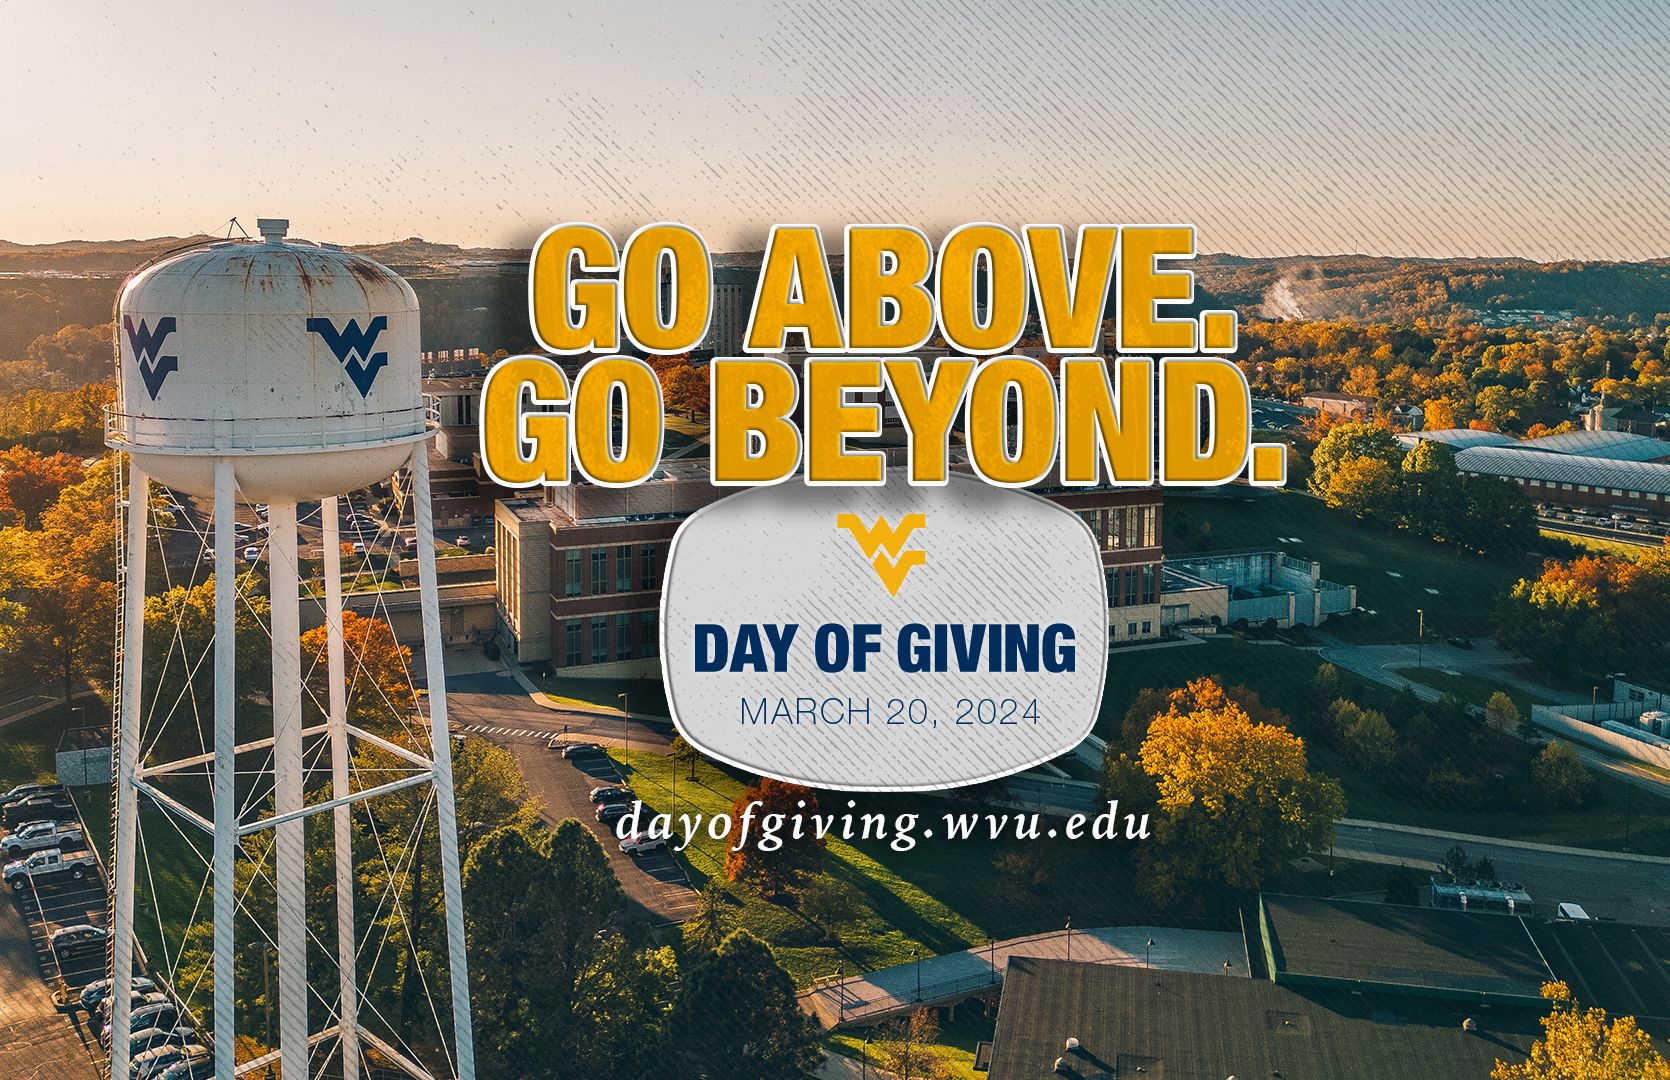 Graphic for WVU Day of Giving featuring an aerial shot of campus with a prominent white water tower inscribed with a blue Flying WV. The words: "Go Above, Go Beyond" are laid over the image as well as the event logo and URL.  